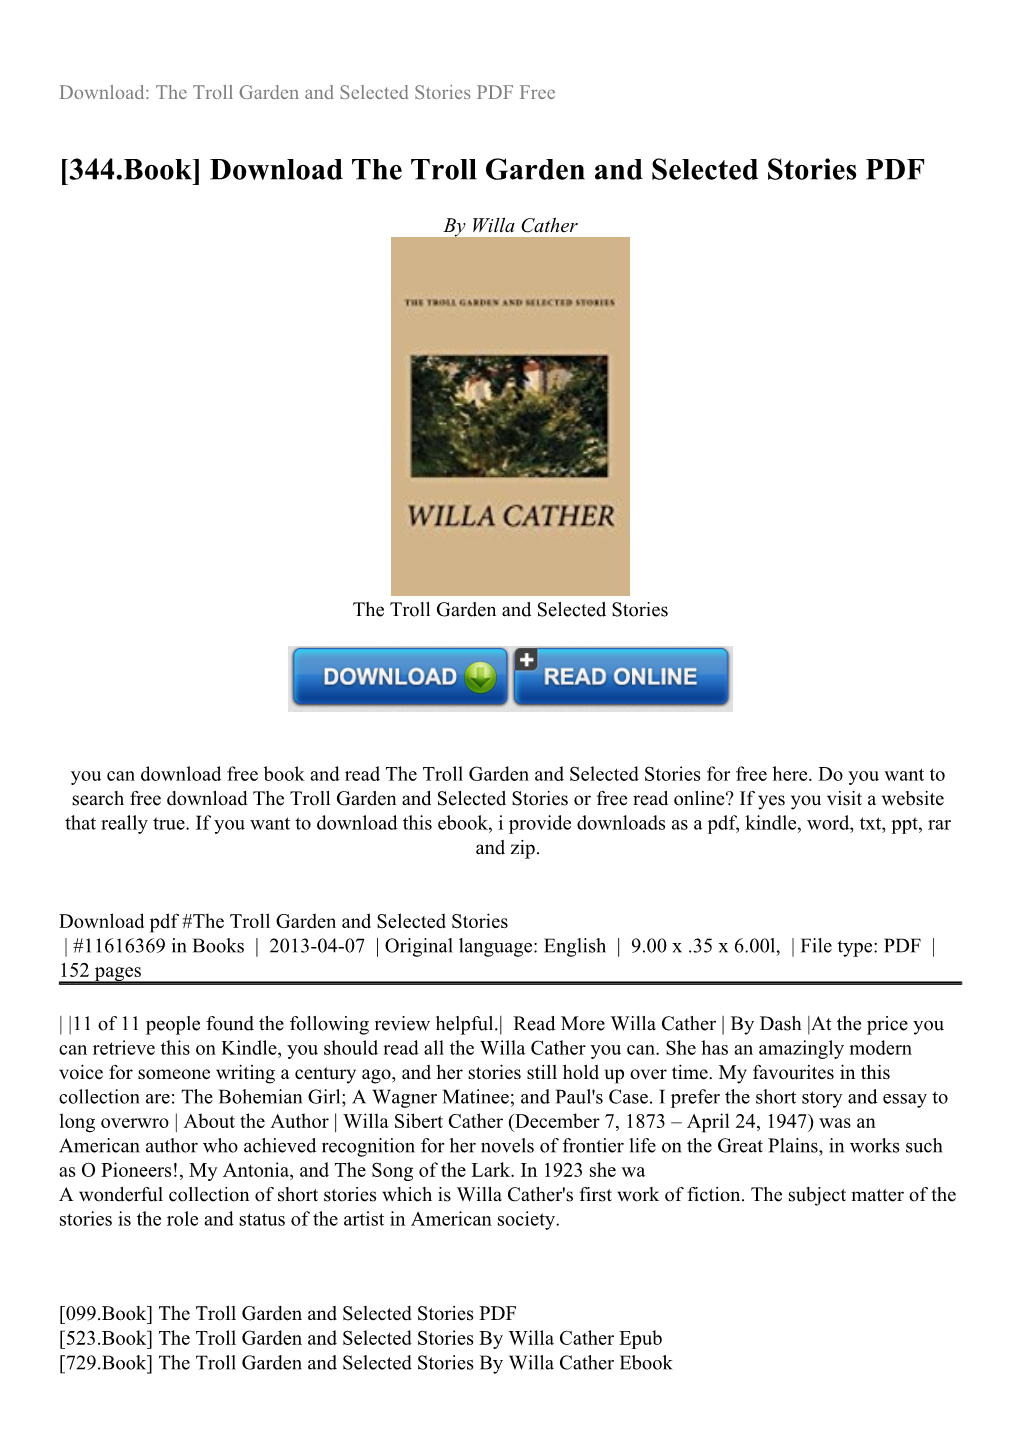 Download the Troll Garden and Selected Stories PDF